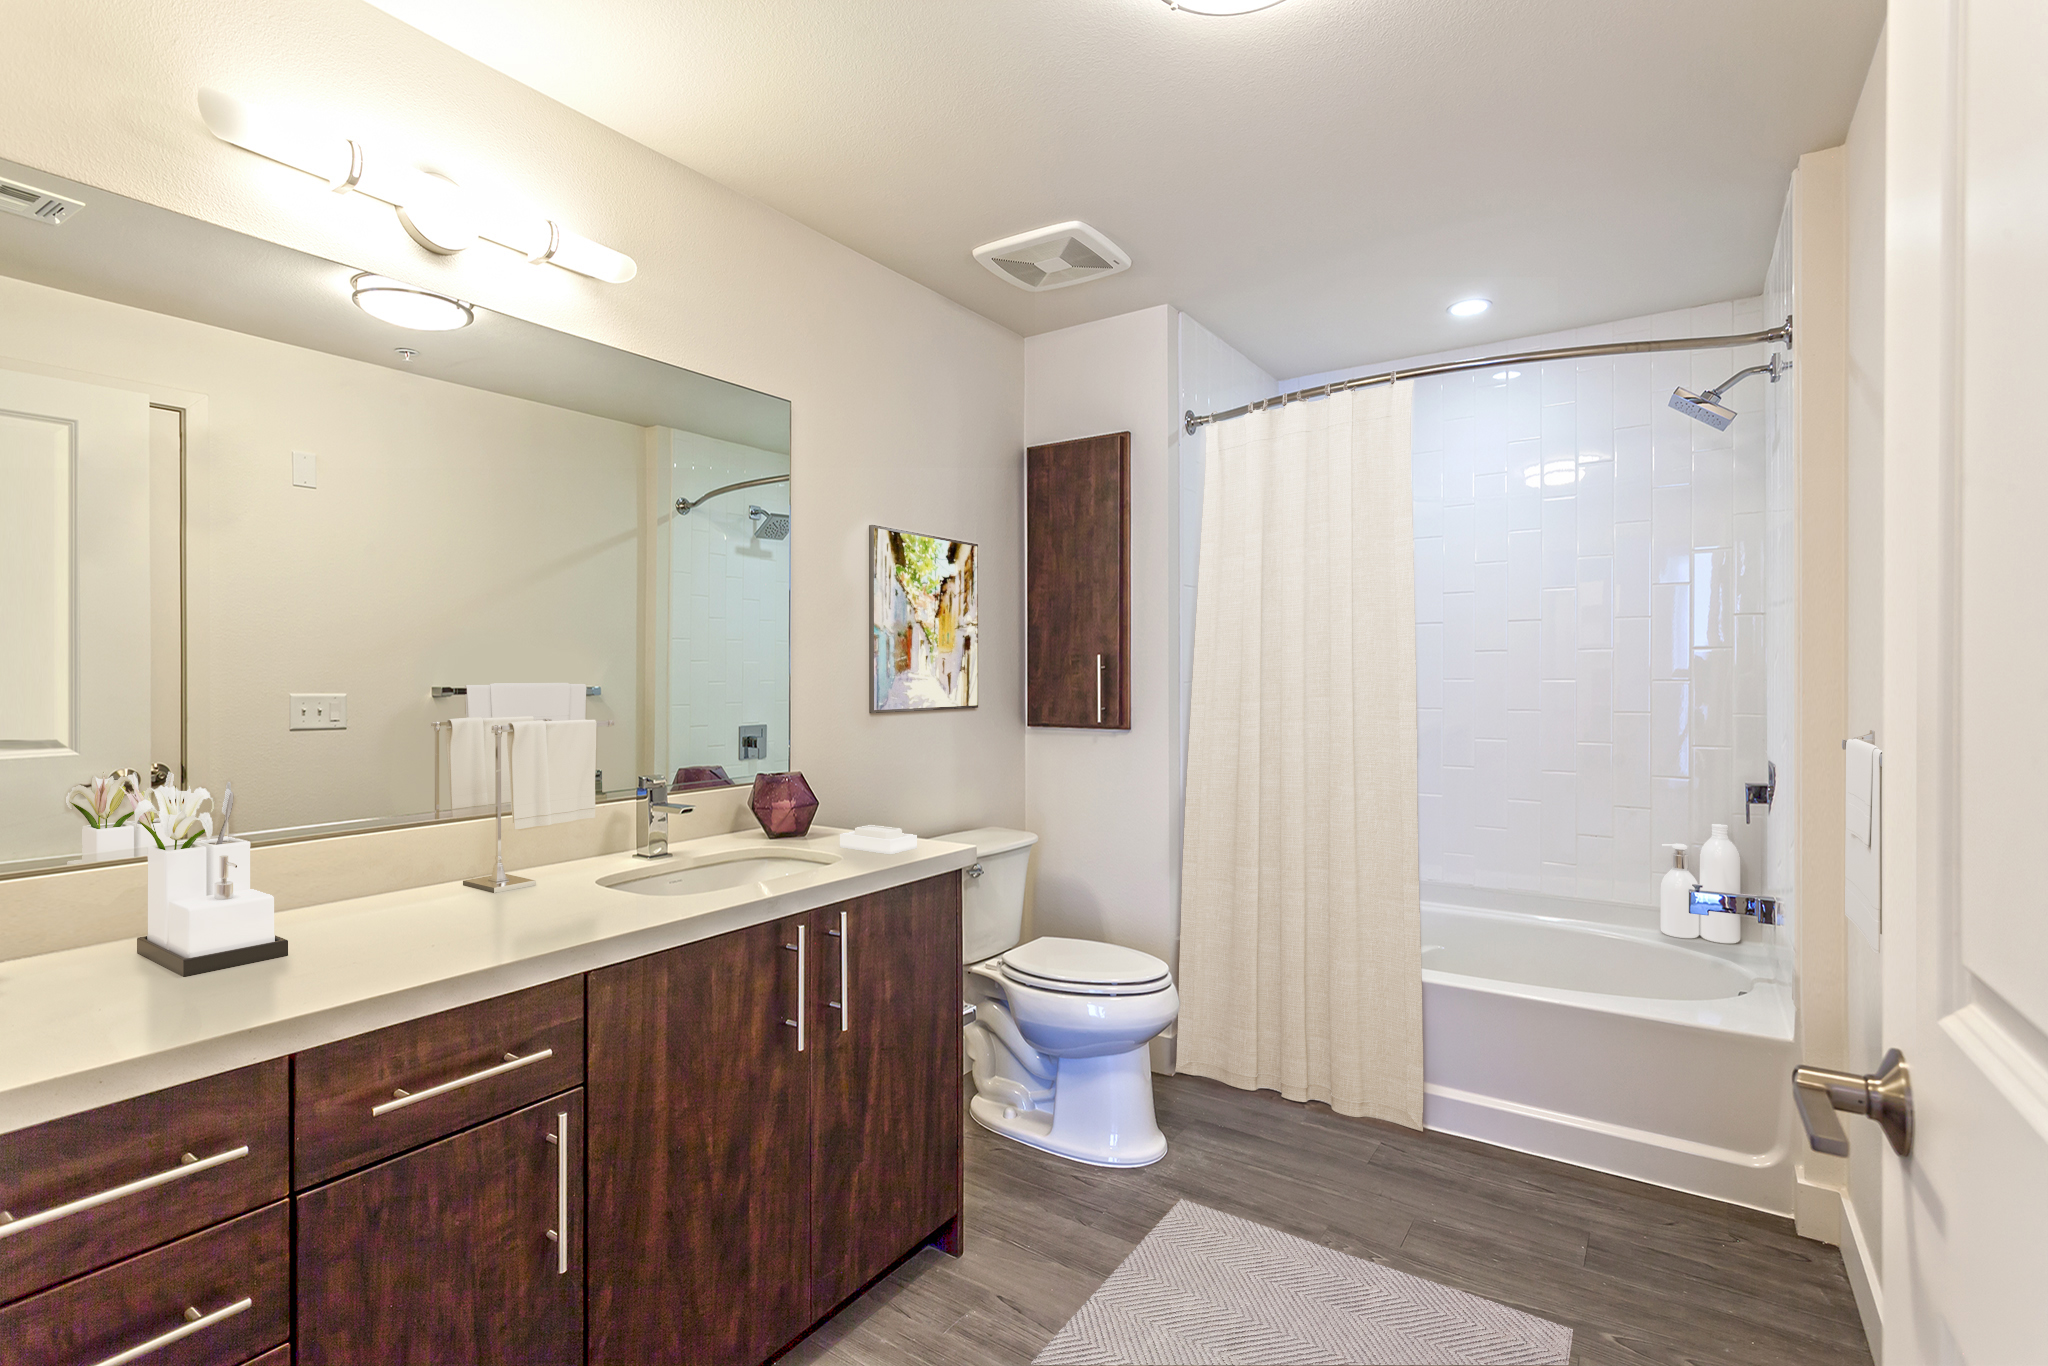 Large bathroom with quartz countertops linen cupboards and bathtub with curved shower rod